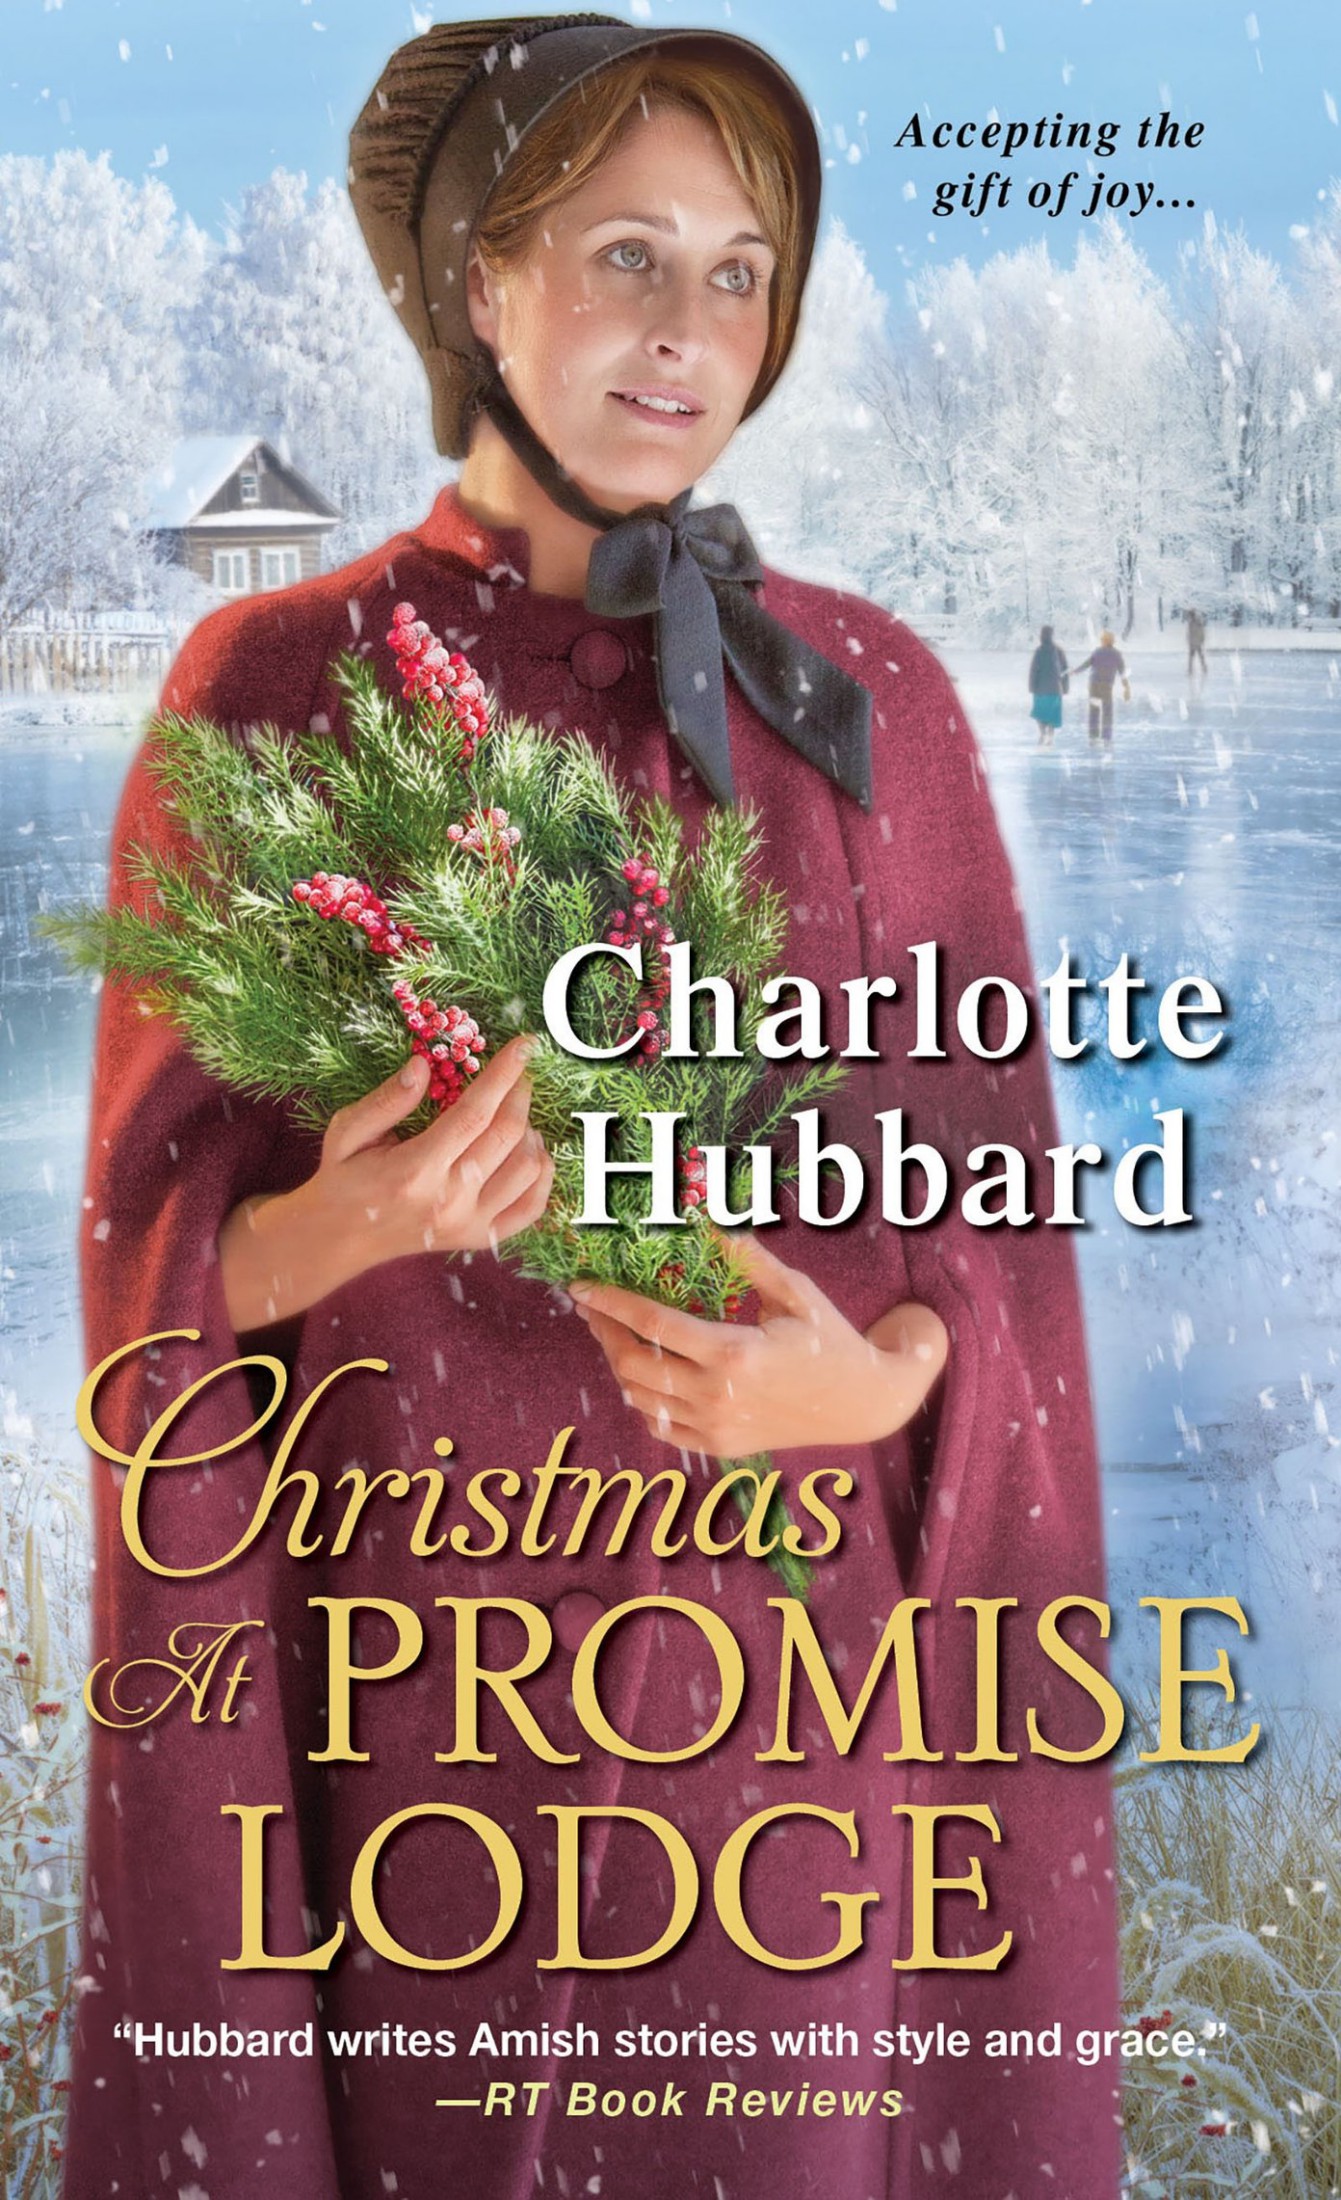 Christmas at Promise Lodge by Charlotte Hubbard